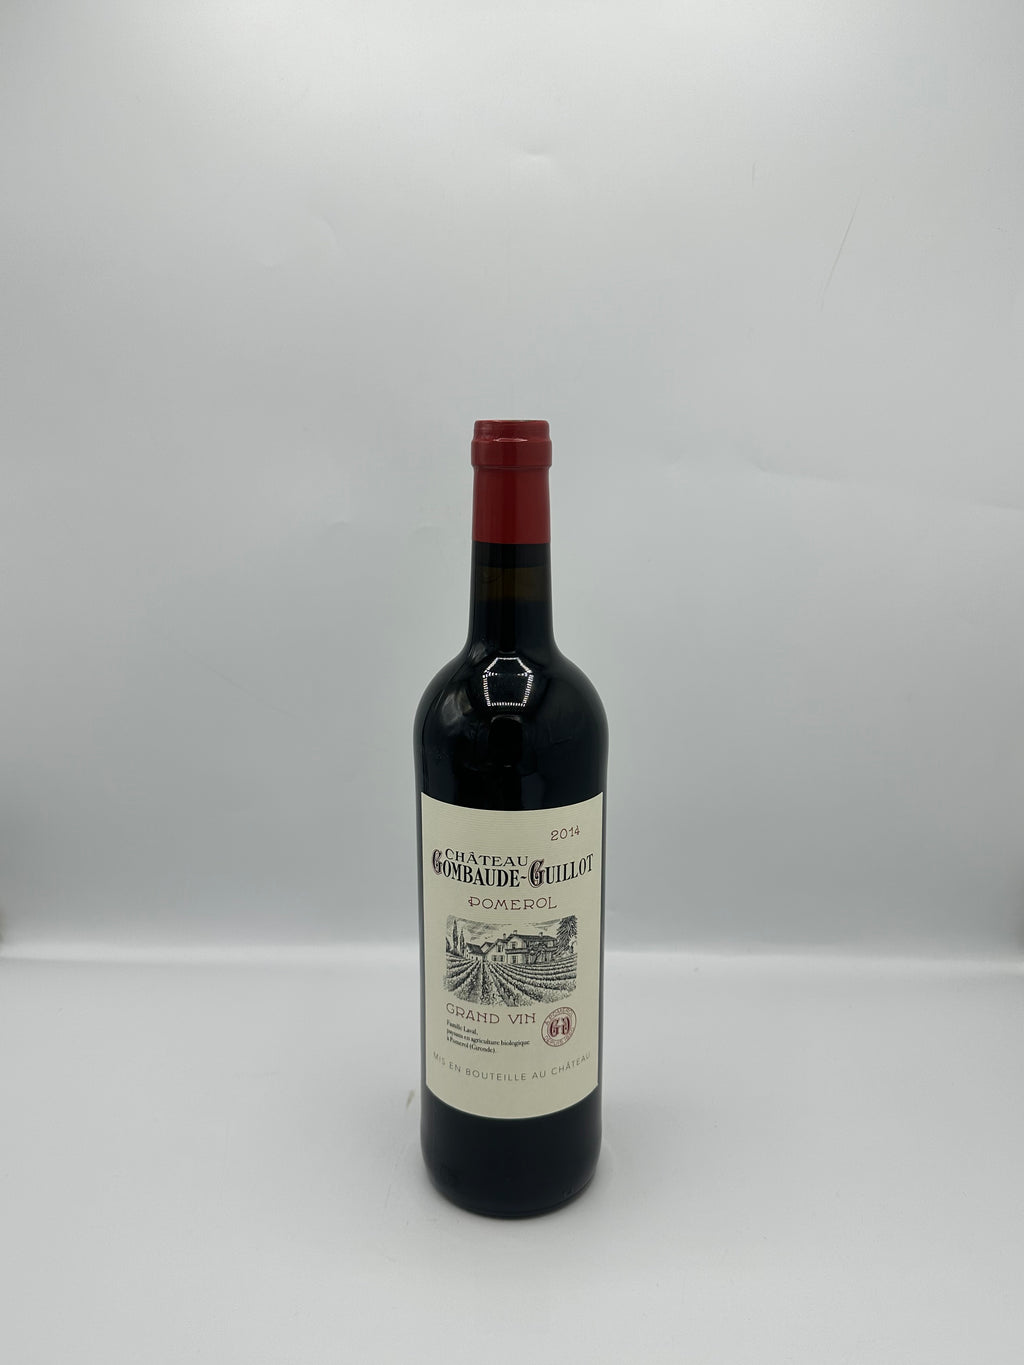 Pomerol 2014 Rouge - Chateau Gombaude-Guillot